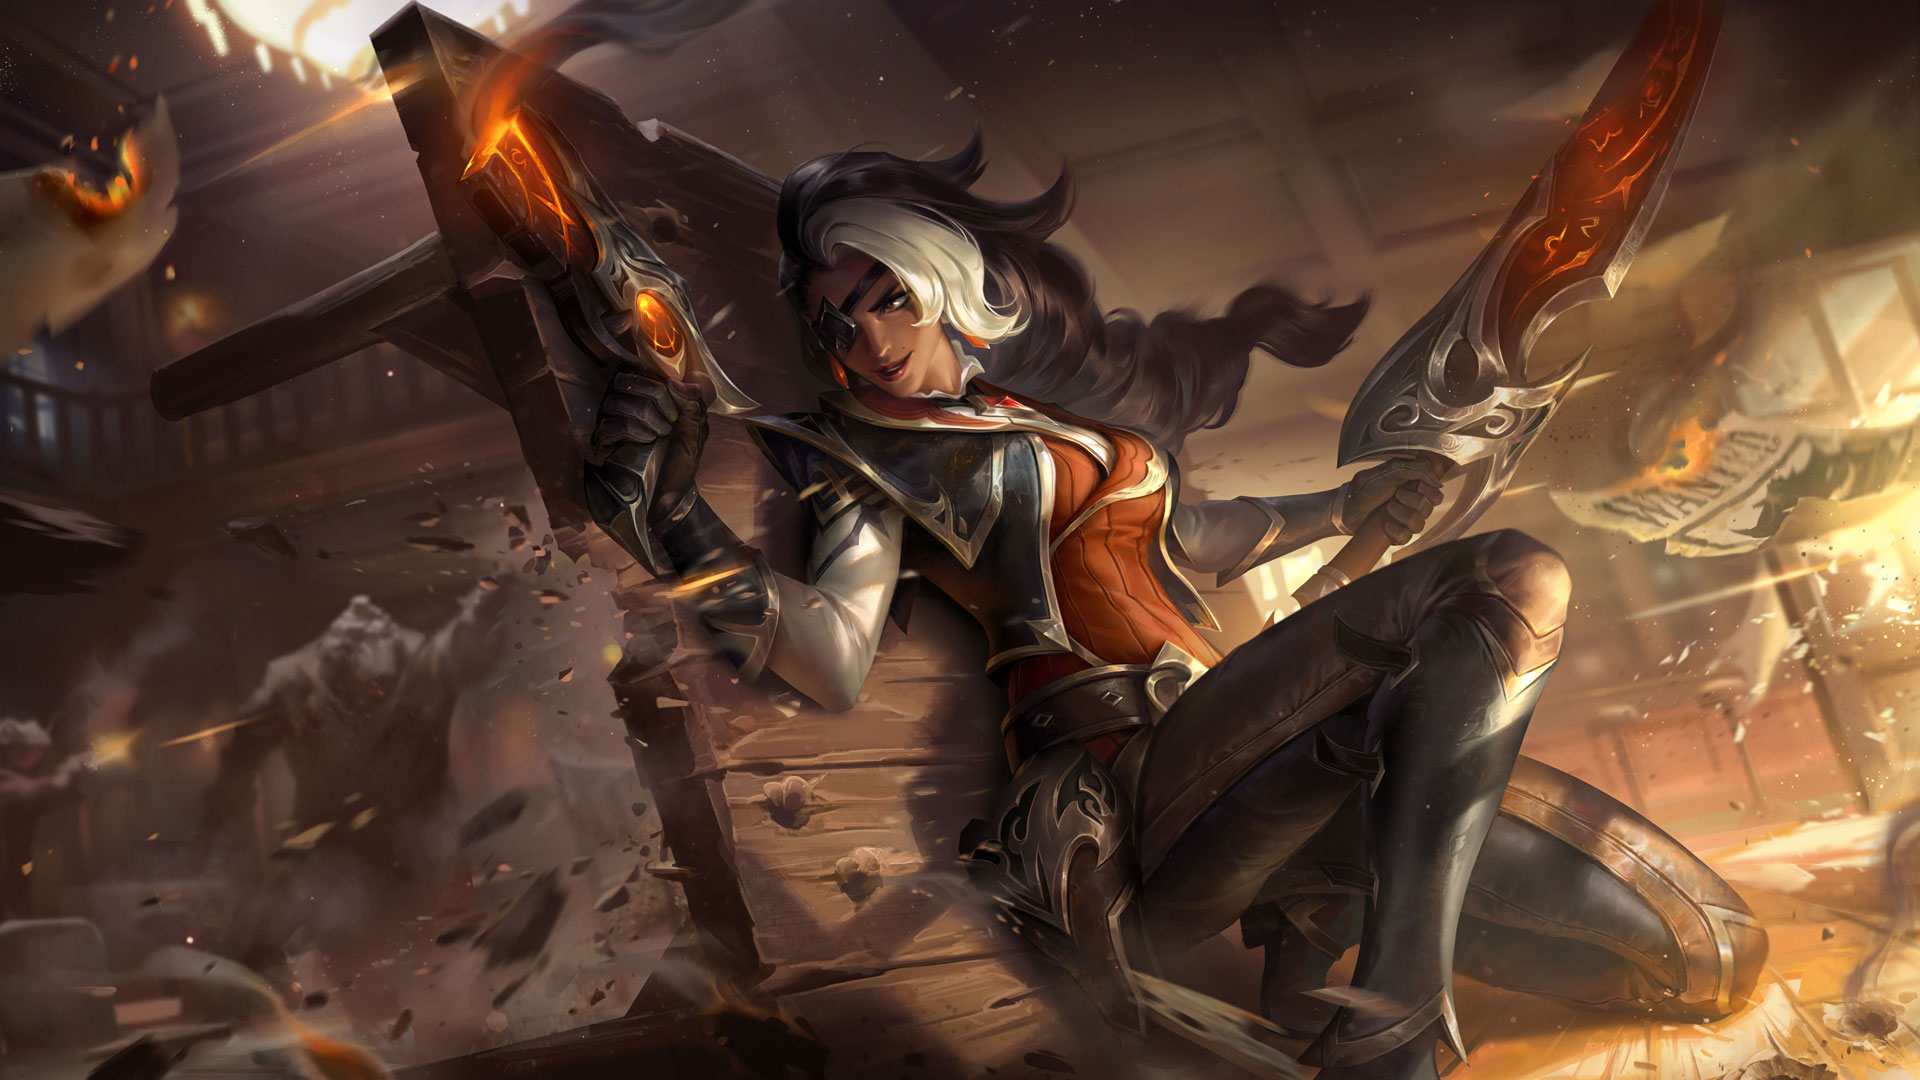 Patch 12.11 Summary :: League of Legends (LoL) Forum on MOBAFire